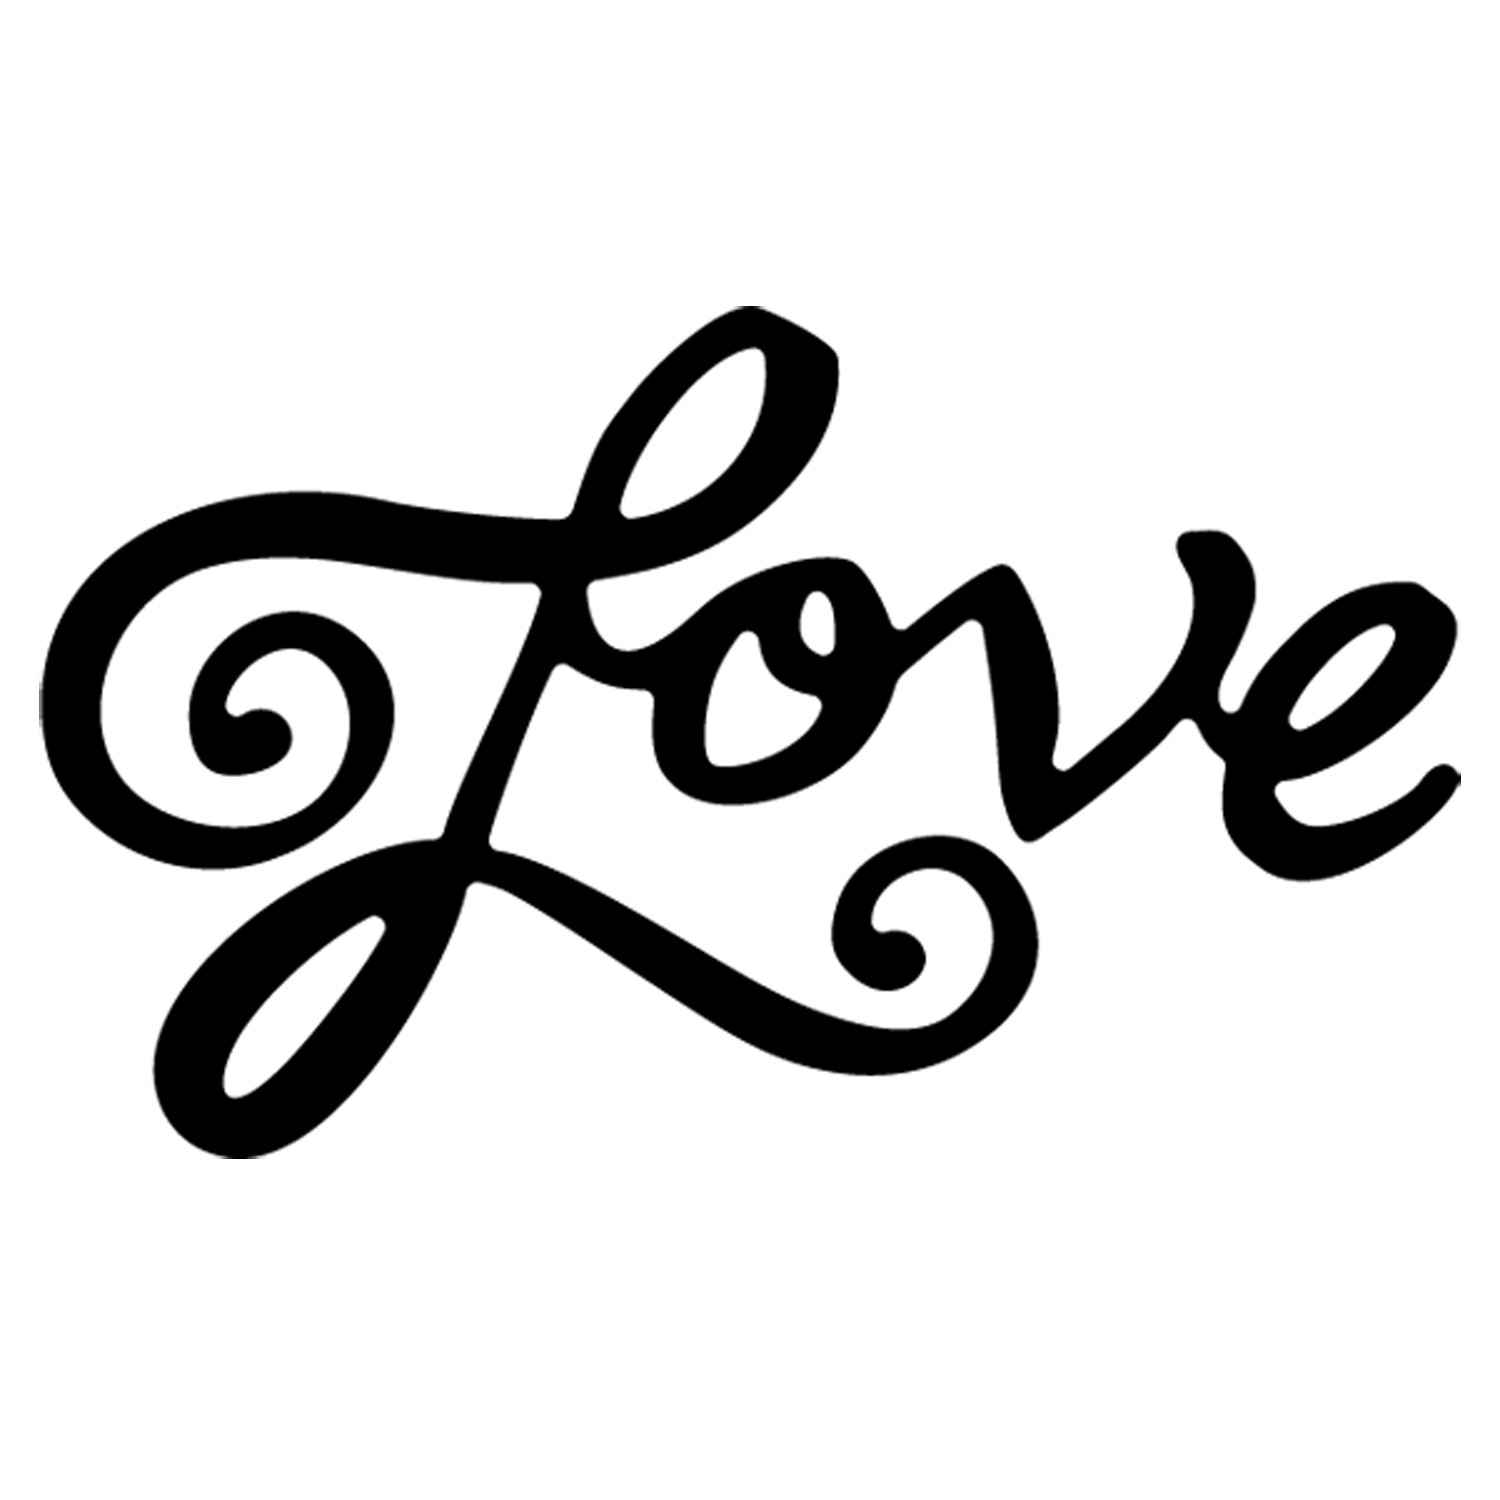 How To Spell Love In Cursive - SPELOL